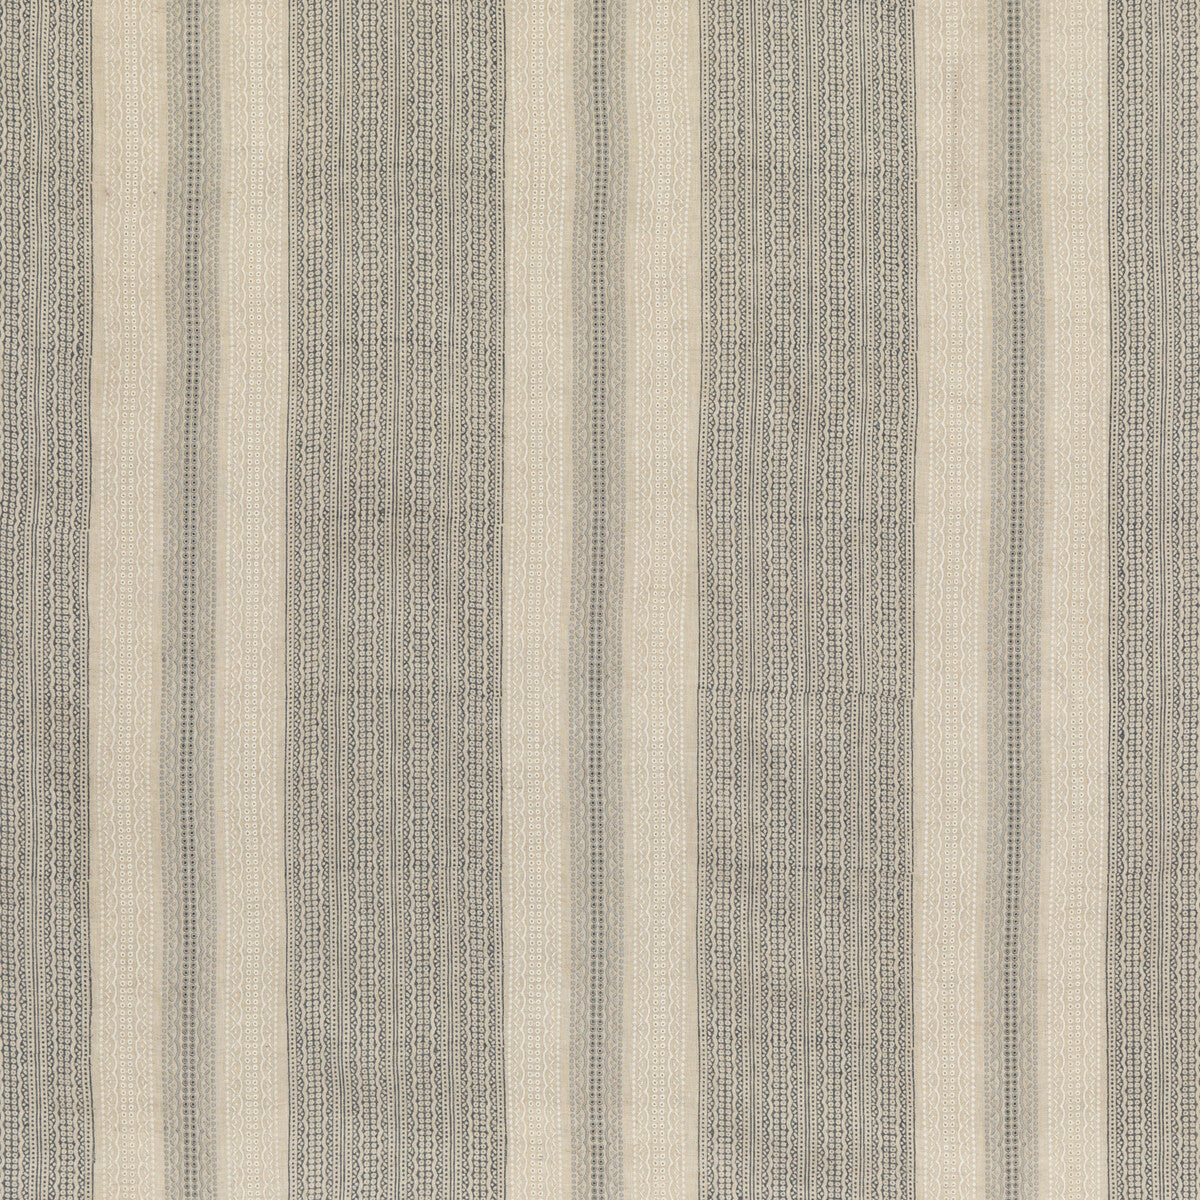 Millbrook fabric in dove color - pattern BP10794.2.0 - by G P &amp; J Baker in the Artisan II collection